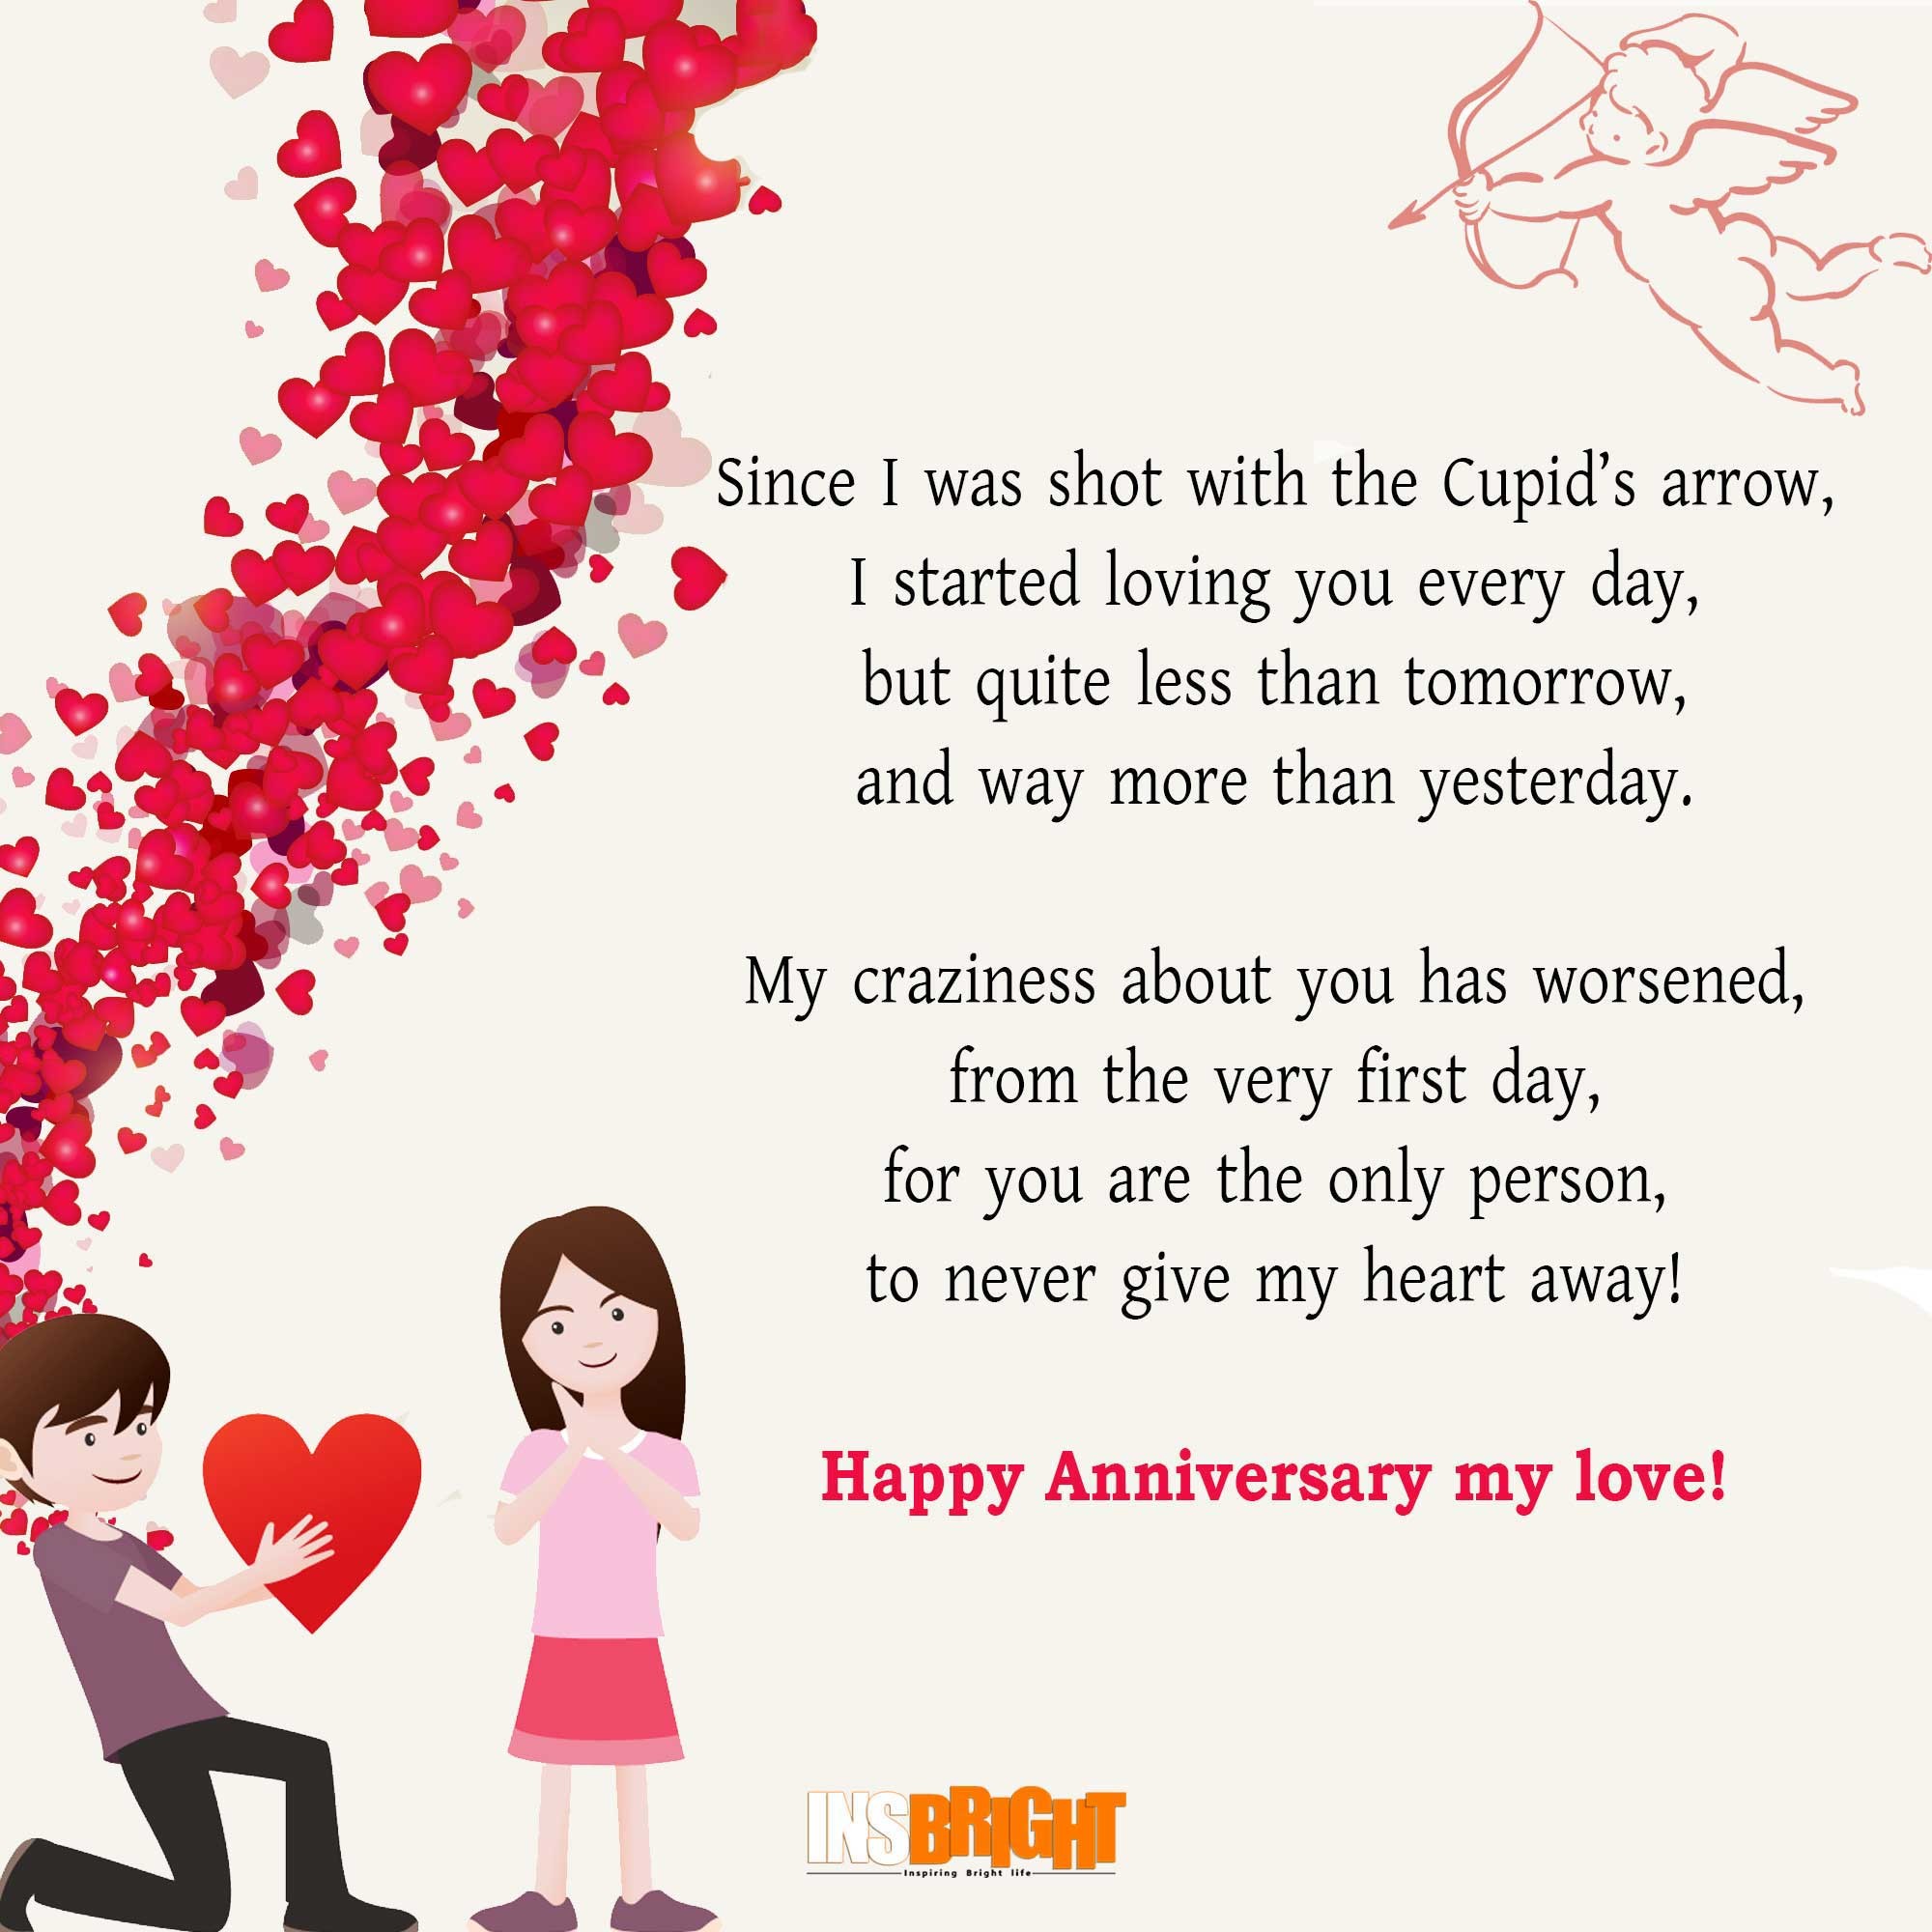 2000x2000 Best Anniversary Poems for Whatsapp Facebook Happy wedding anniversary  Poems Images Wallpapers Pictures marriage anniversary Special